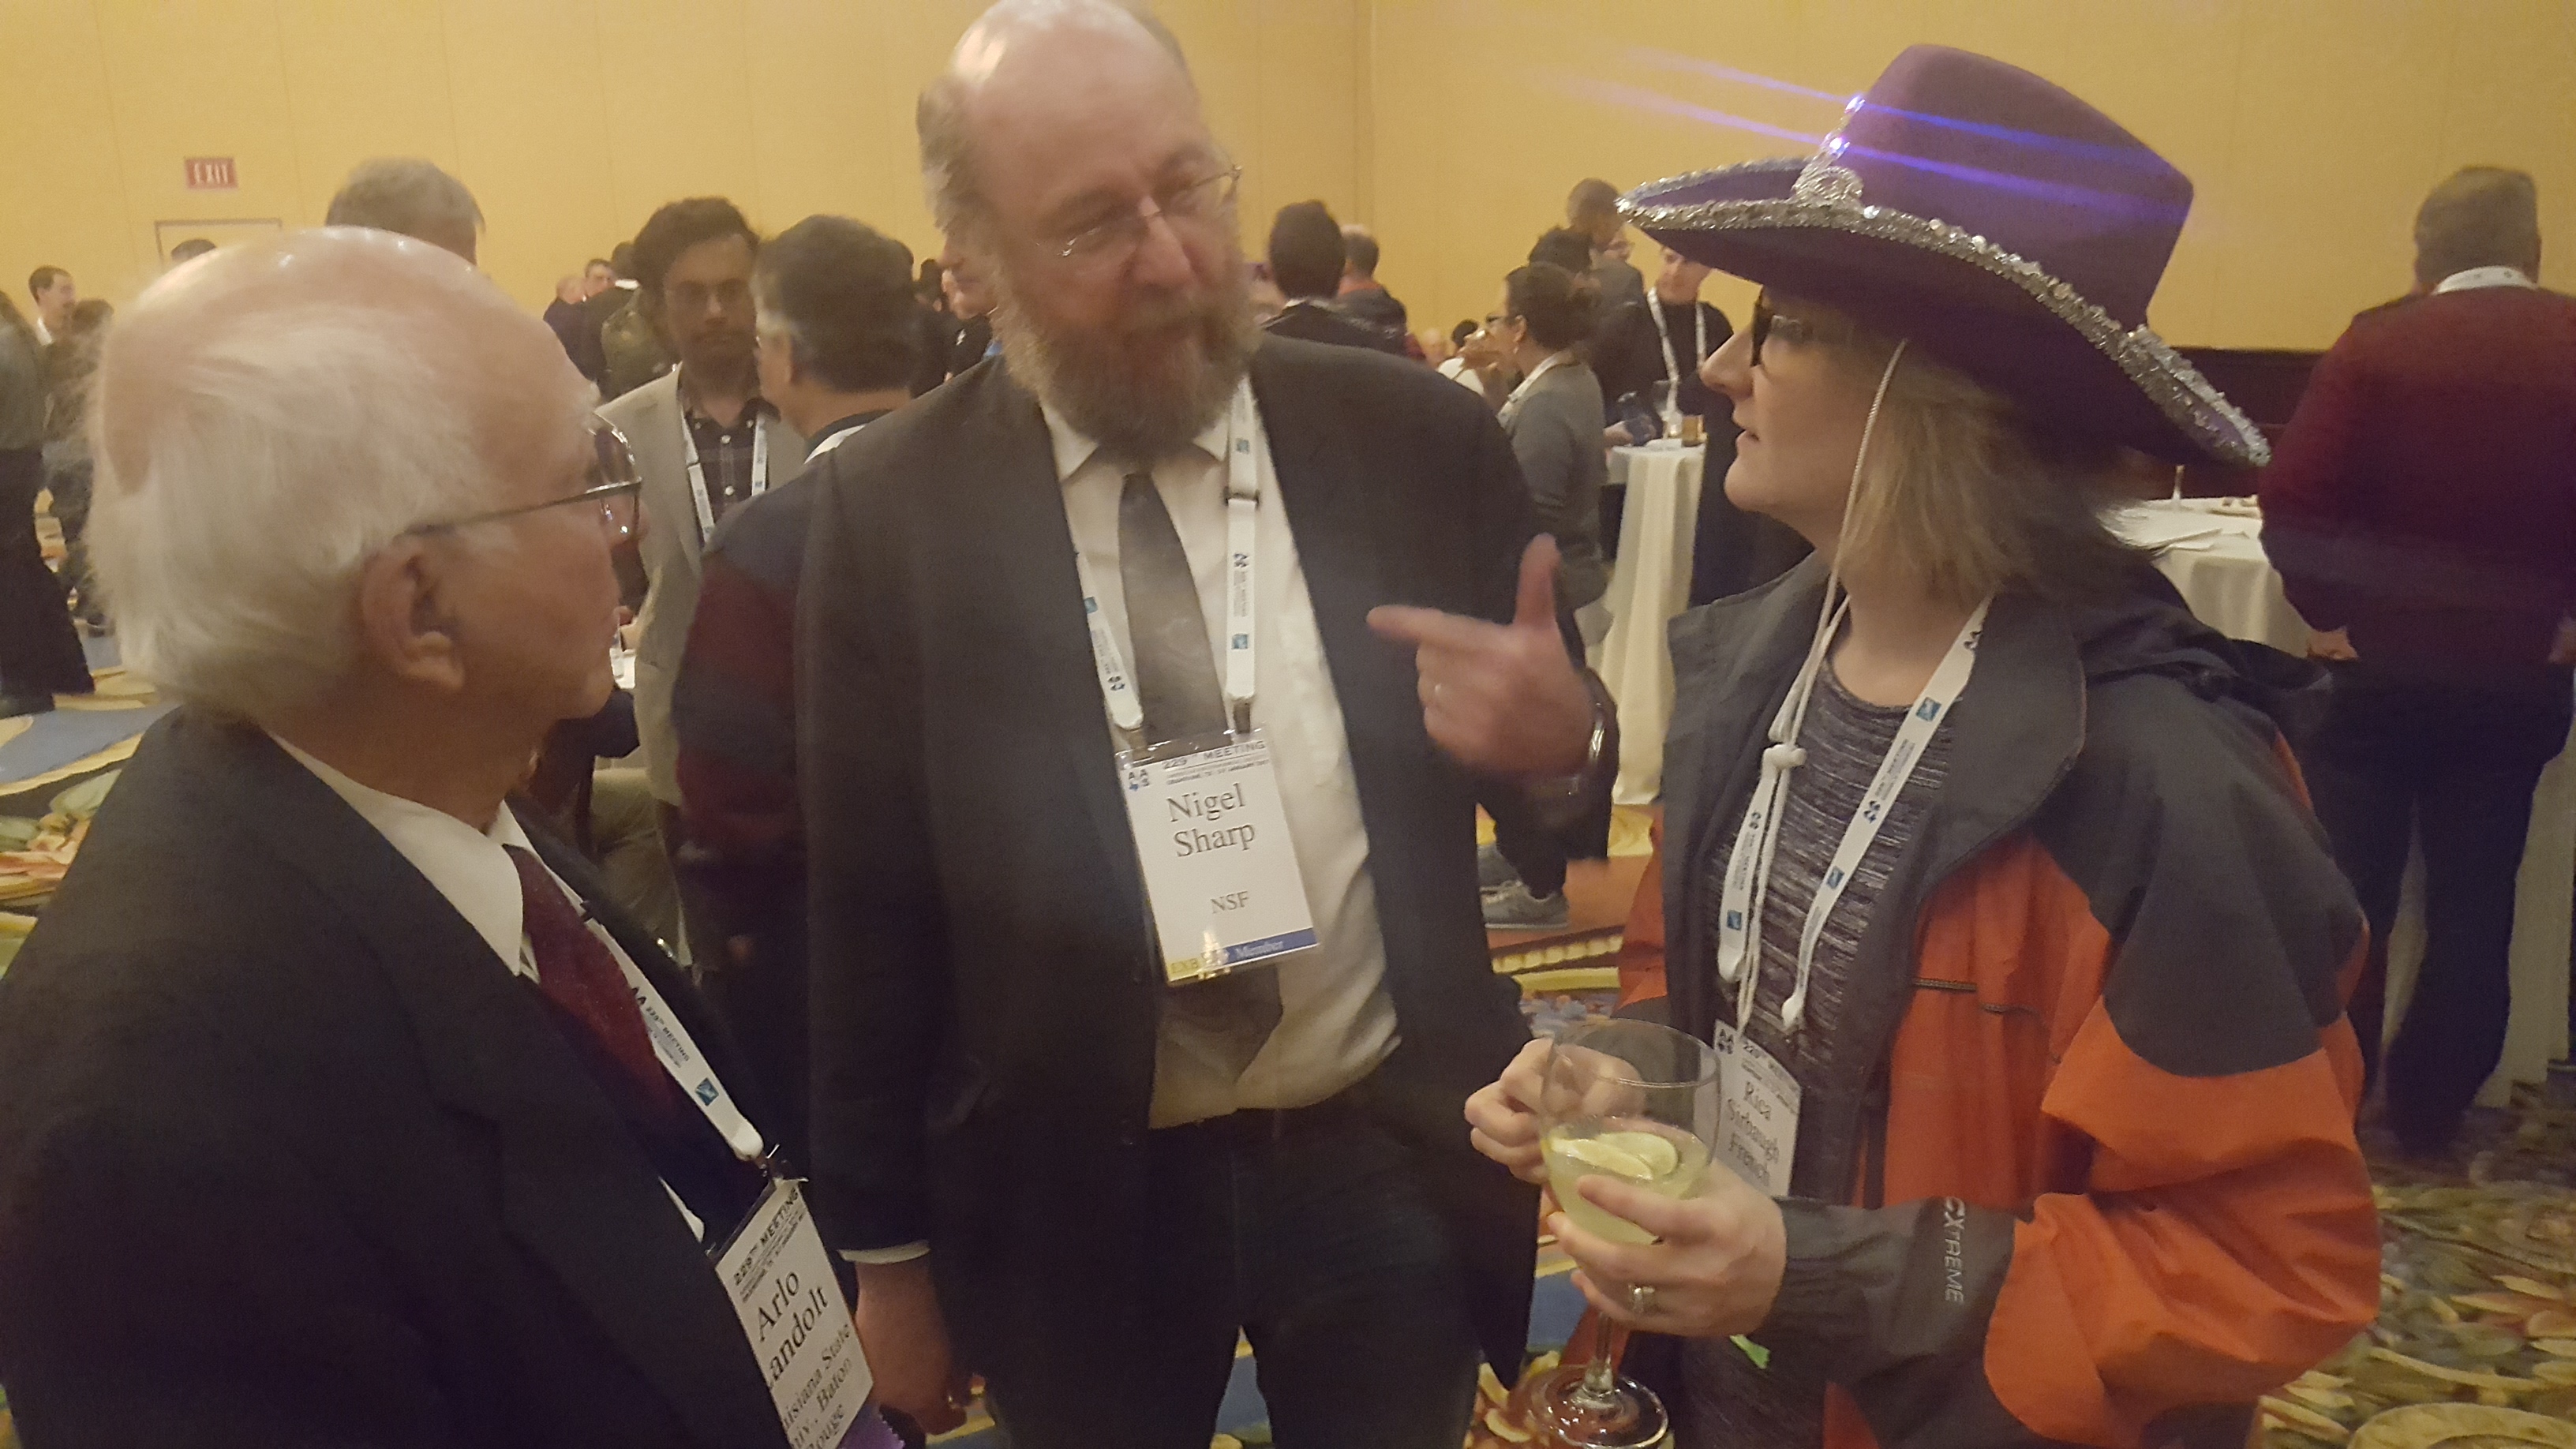 Arlo, Nigel Sharp, and me chatting at an AAS229 reception while I wear my hat.